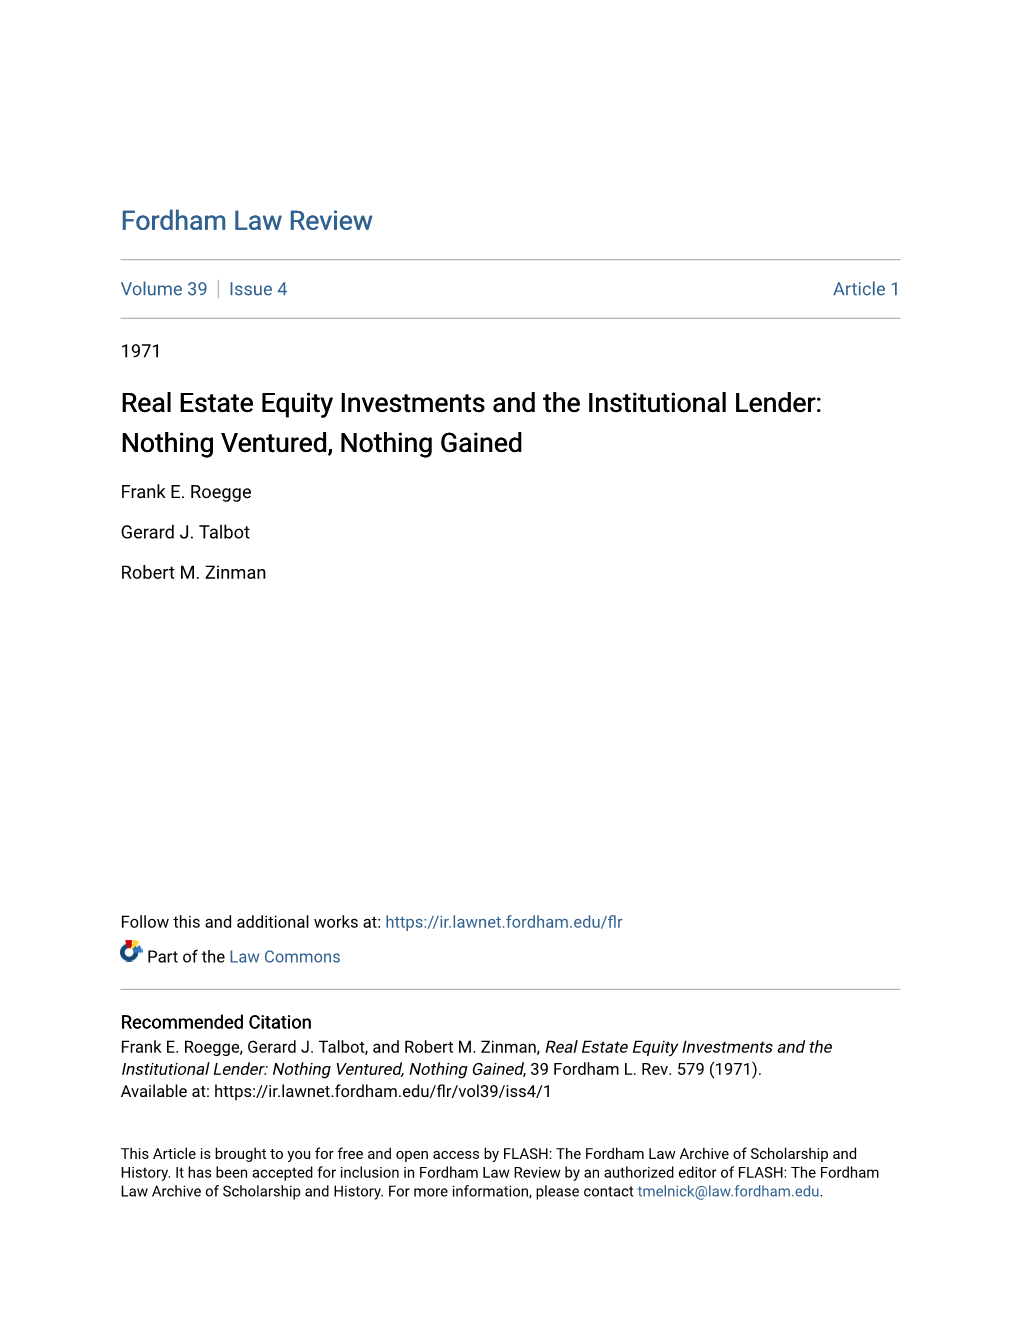 Real Estate Equity Investments and the Institutional Lender: Nothing Ventured, Nothing Gained